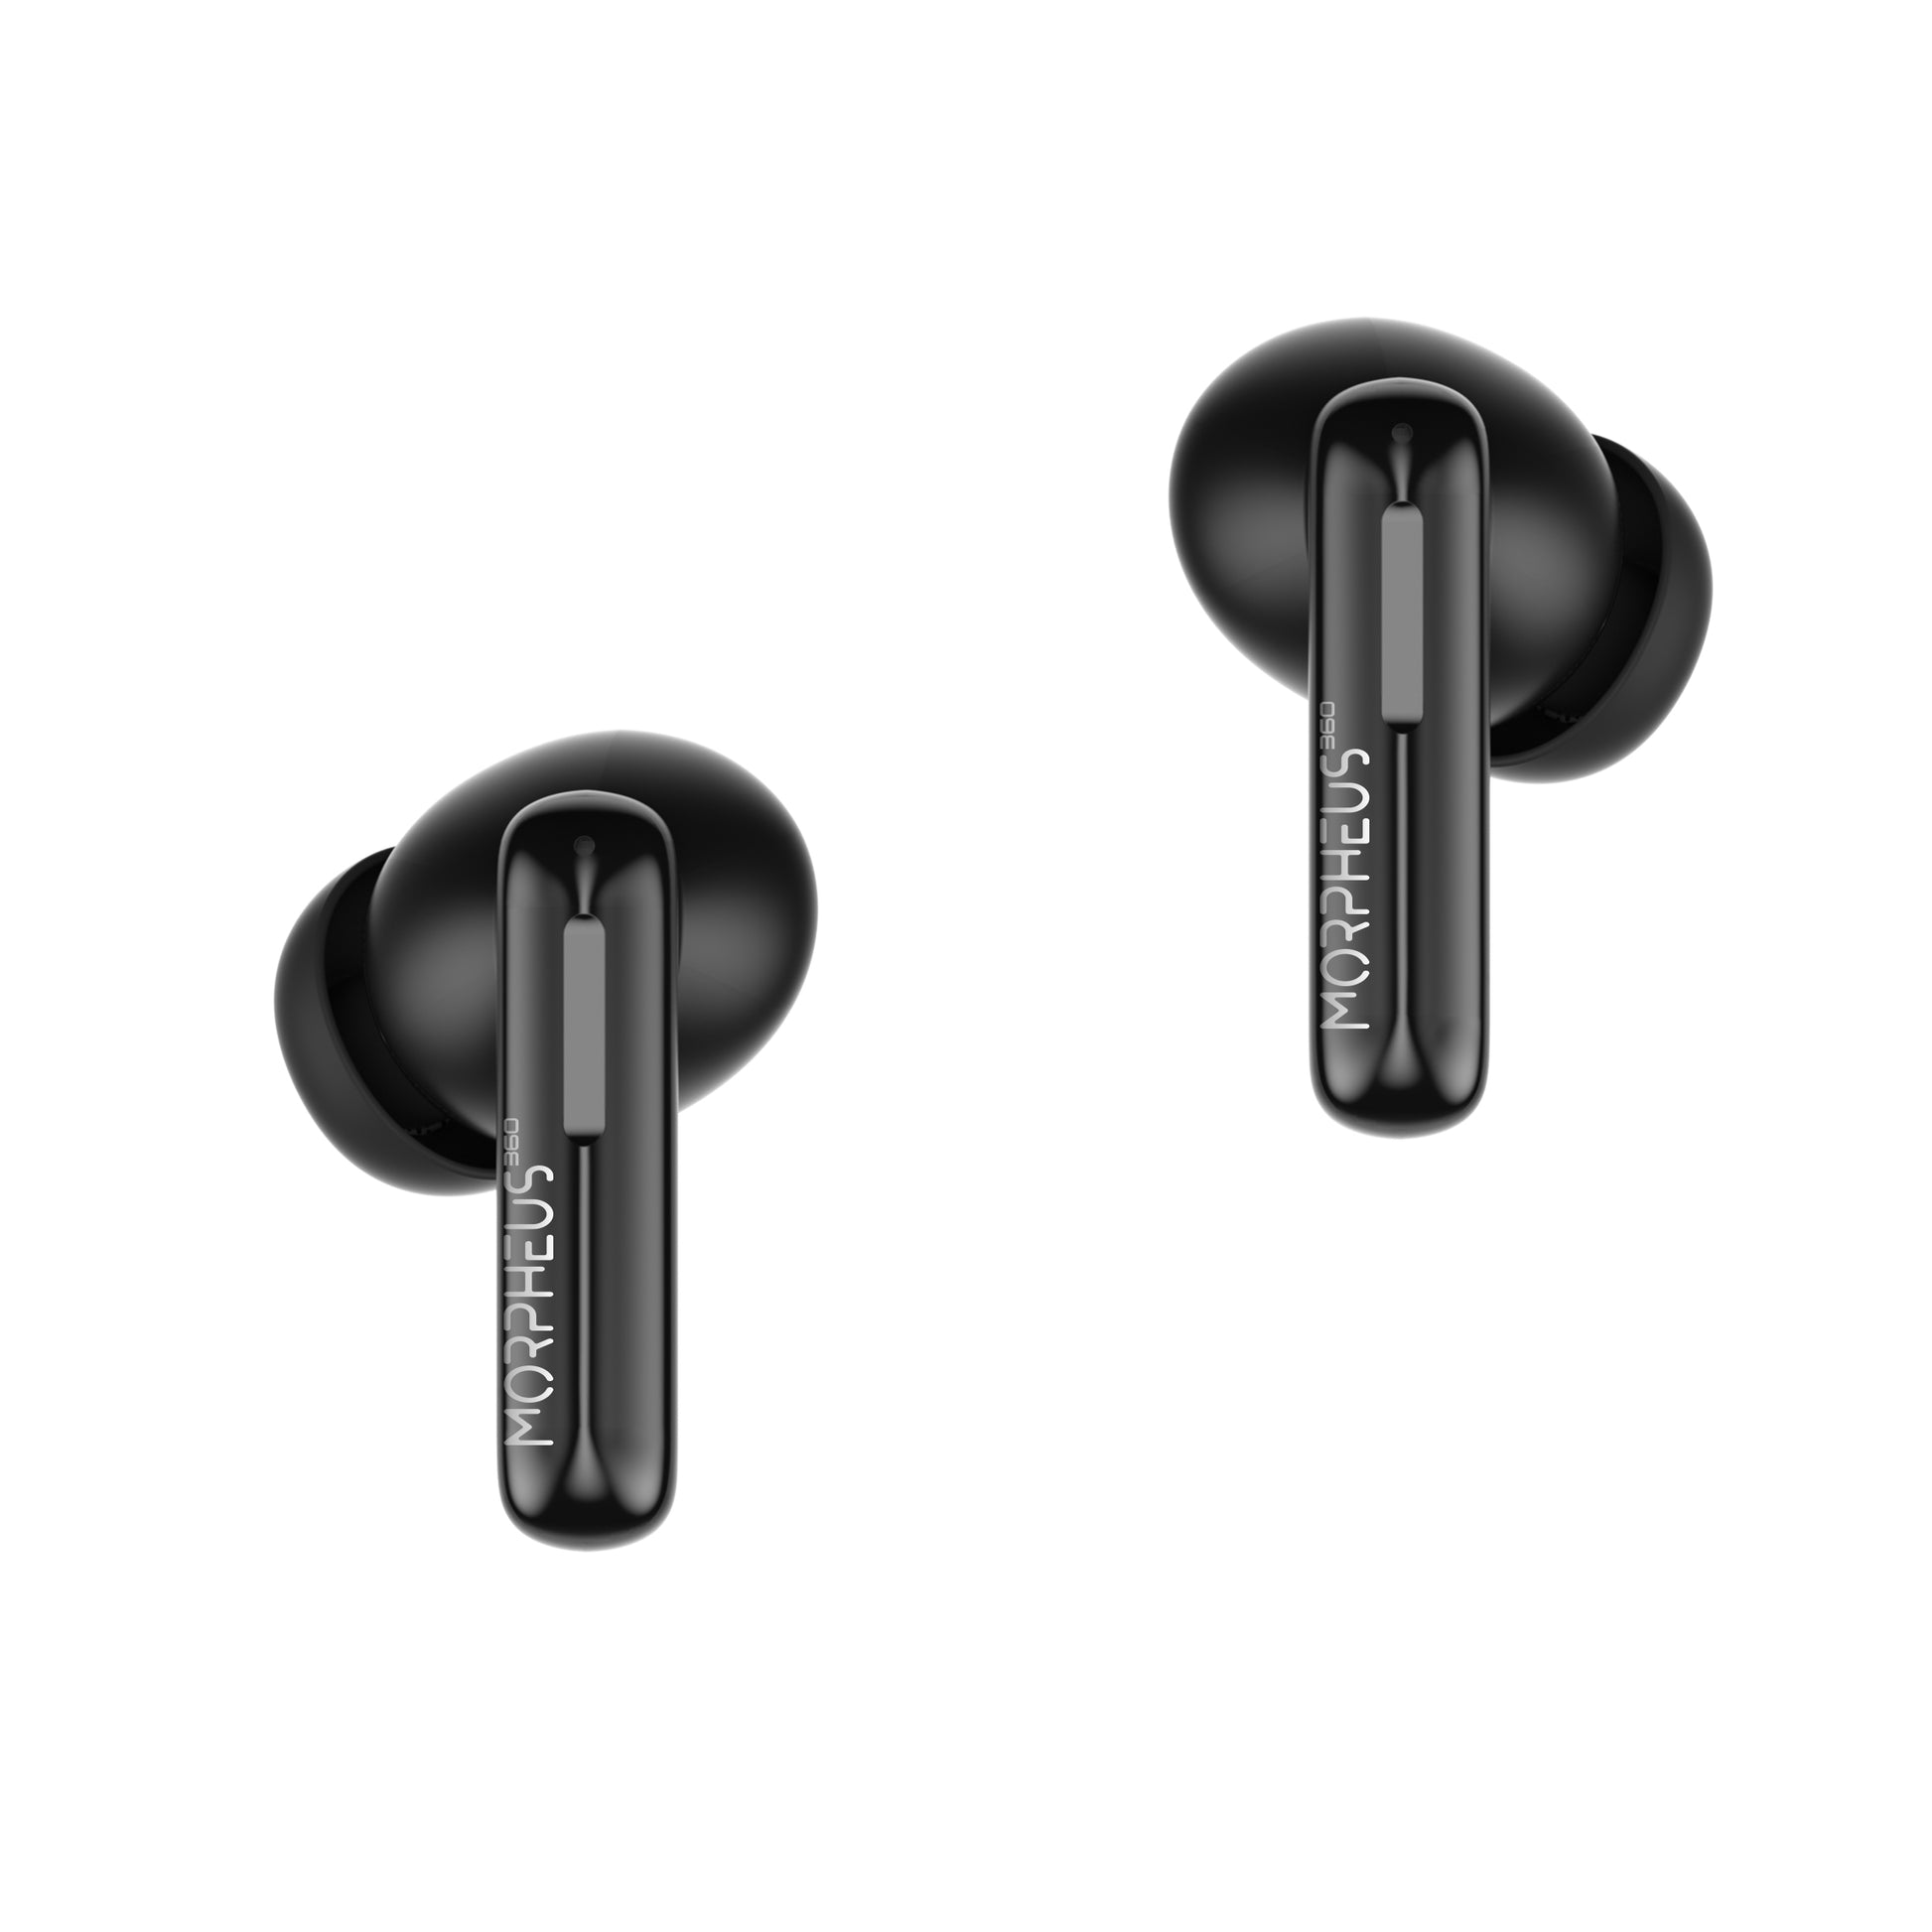 Best Budget Noise Cancelling Buds?